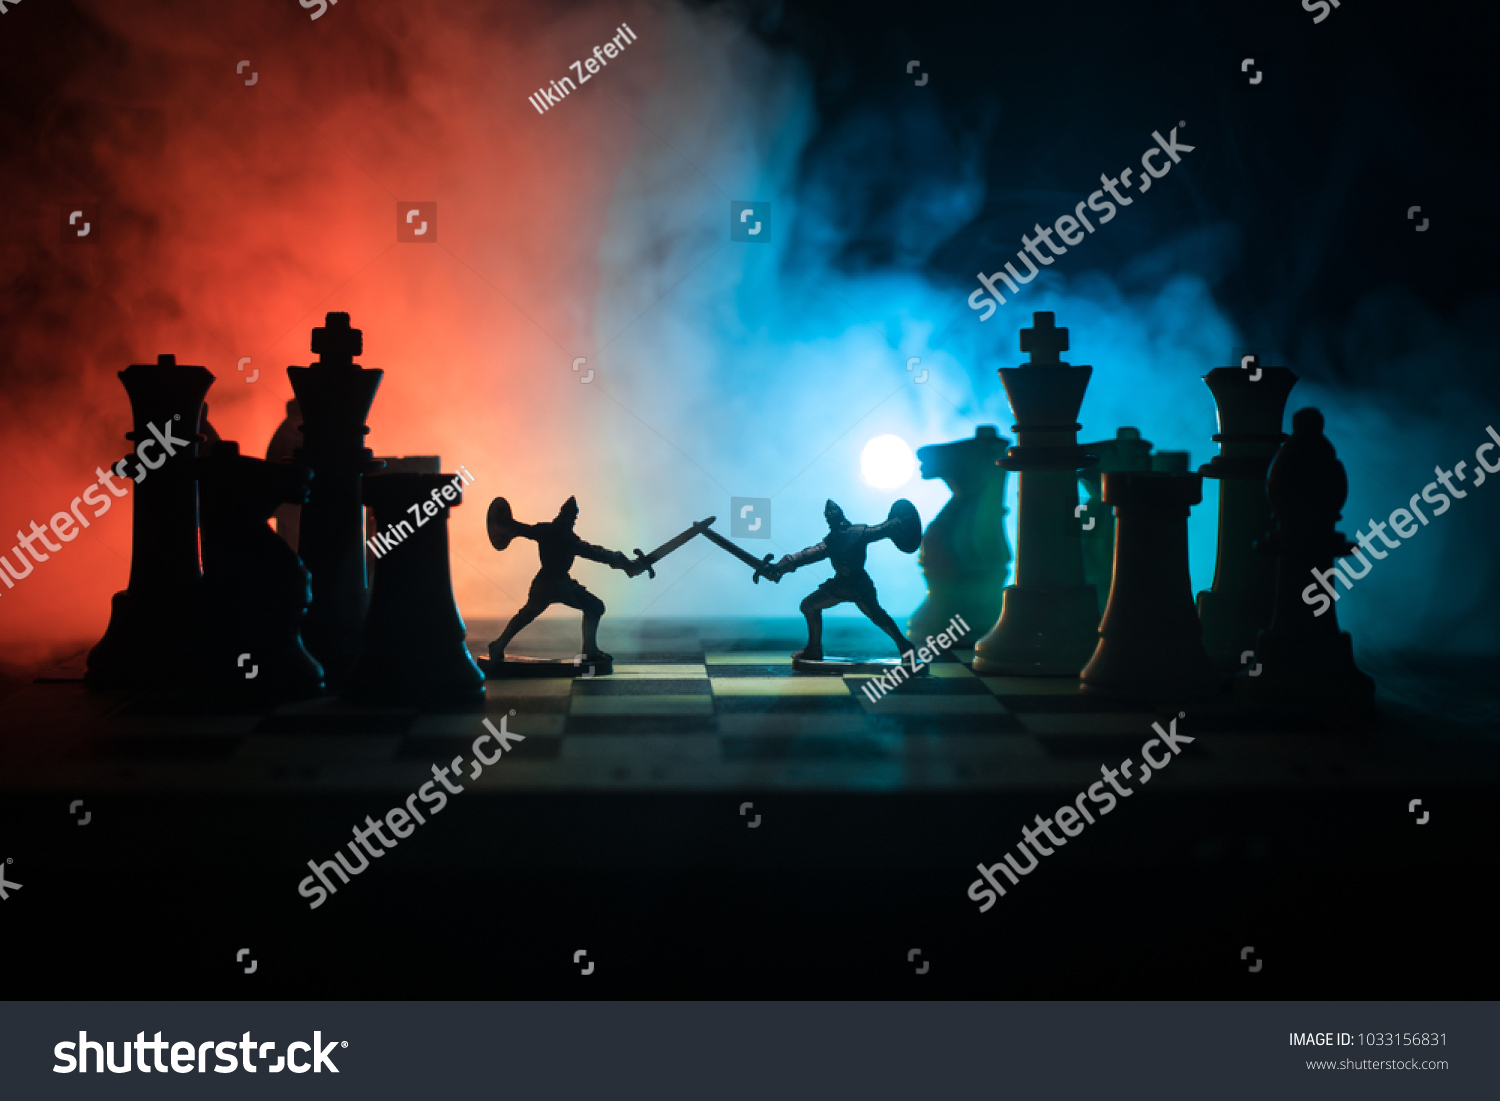 Medieval battle scene with cavalry and infantry on chessboard. Chess board game concept of business ideas and competition and strategy ideas Chess figures on a dark background with smoke and fog. #1033156831